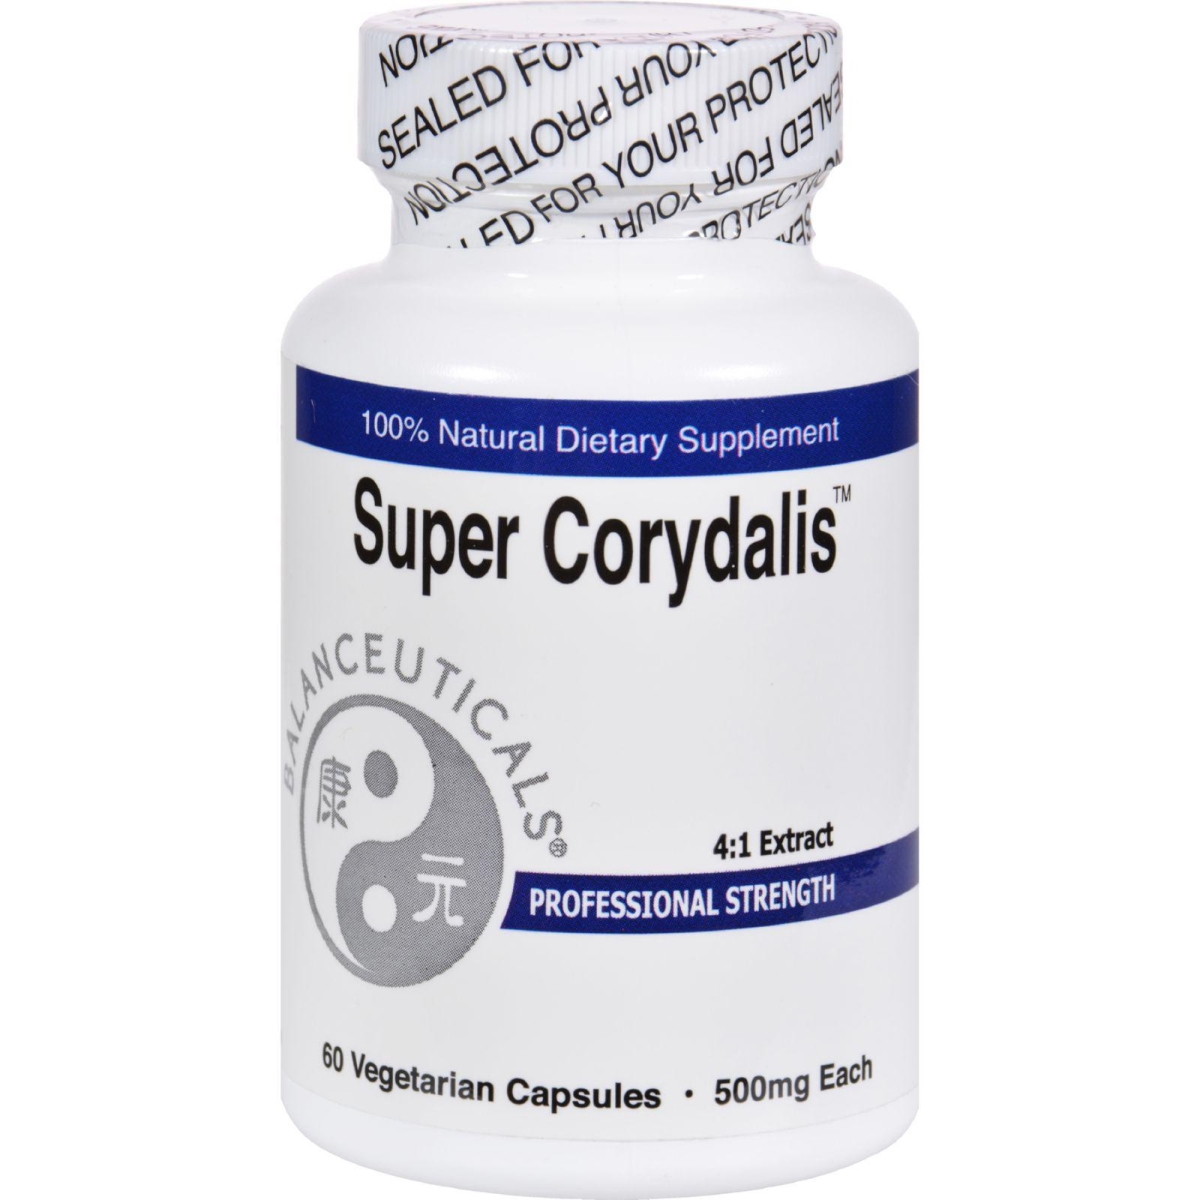 Hg1615236 500 Mg Super Corydalis 4 Is To 1 Extract - 60 Veg Capsules